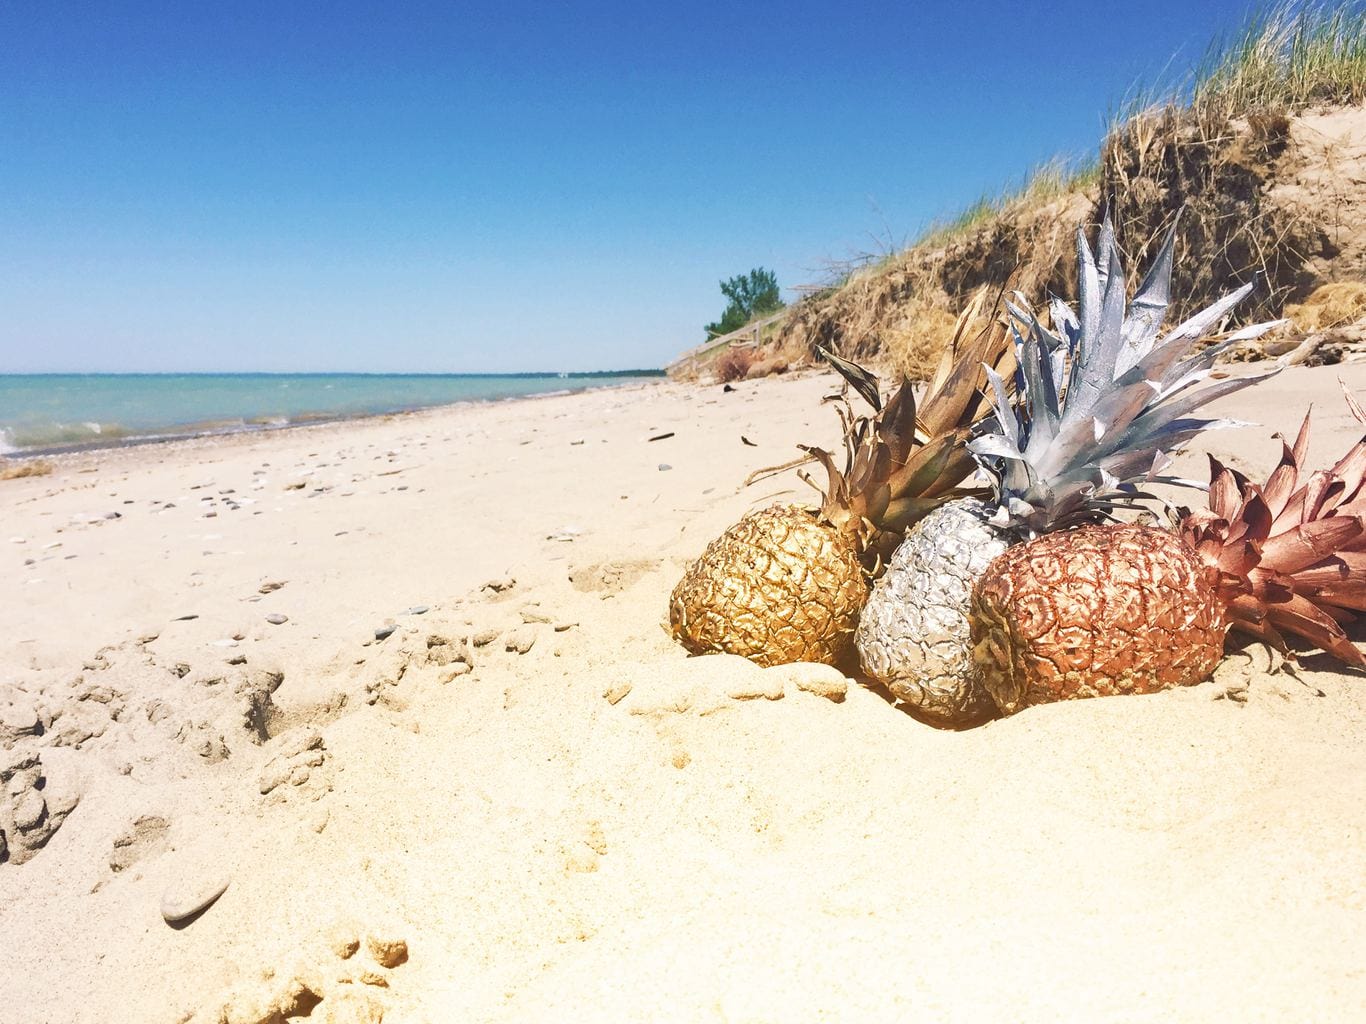 What to wear in the sweltering summer heat – pineapples on the beach in metallic colors